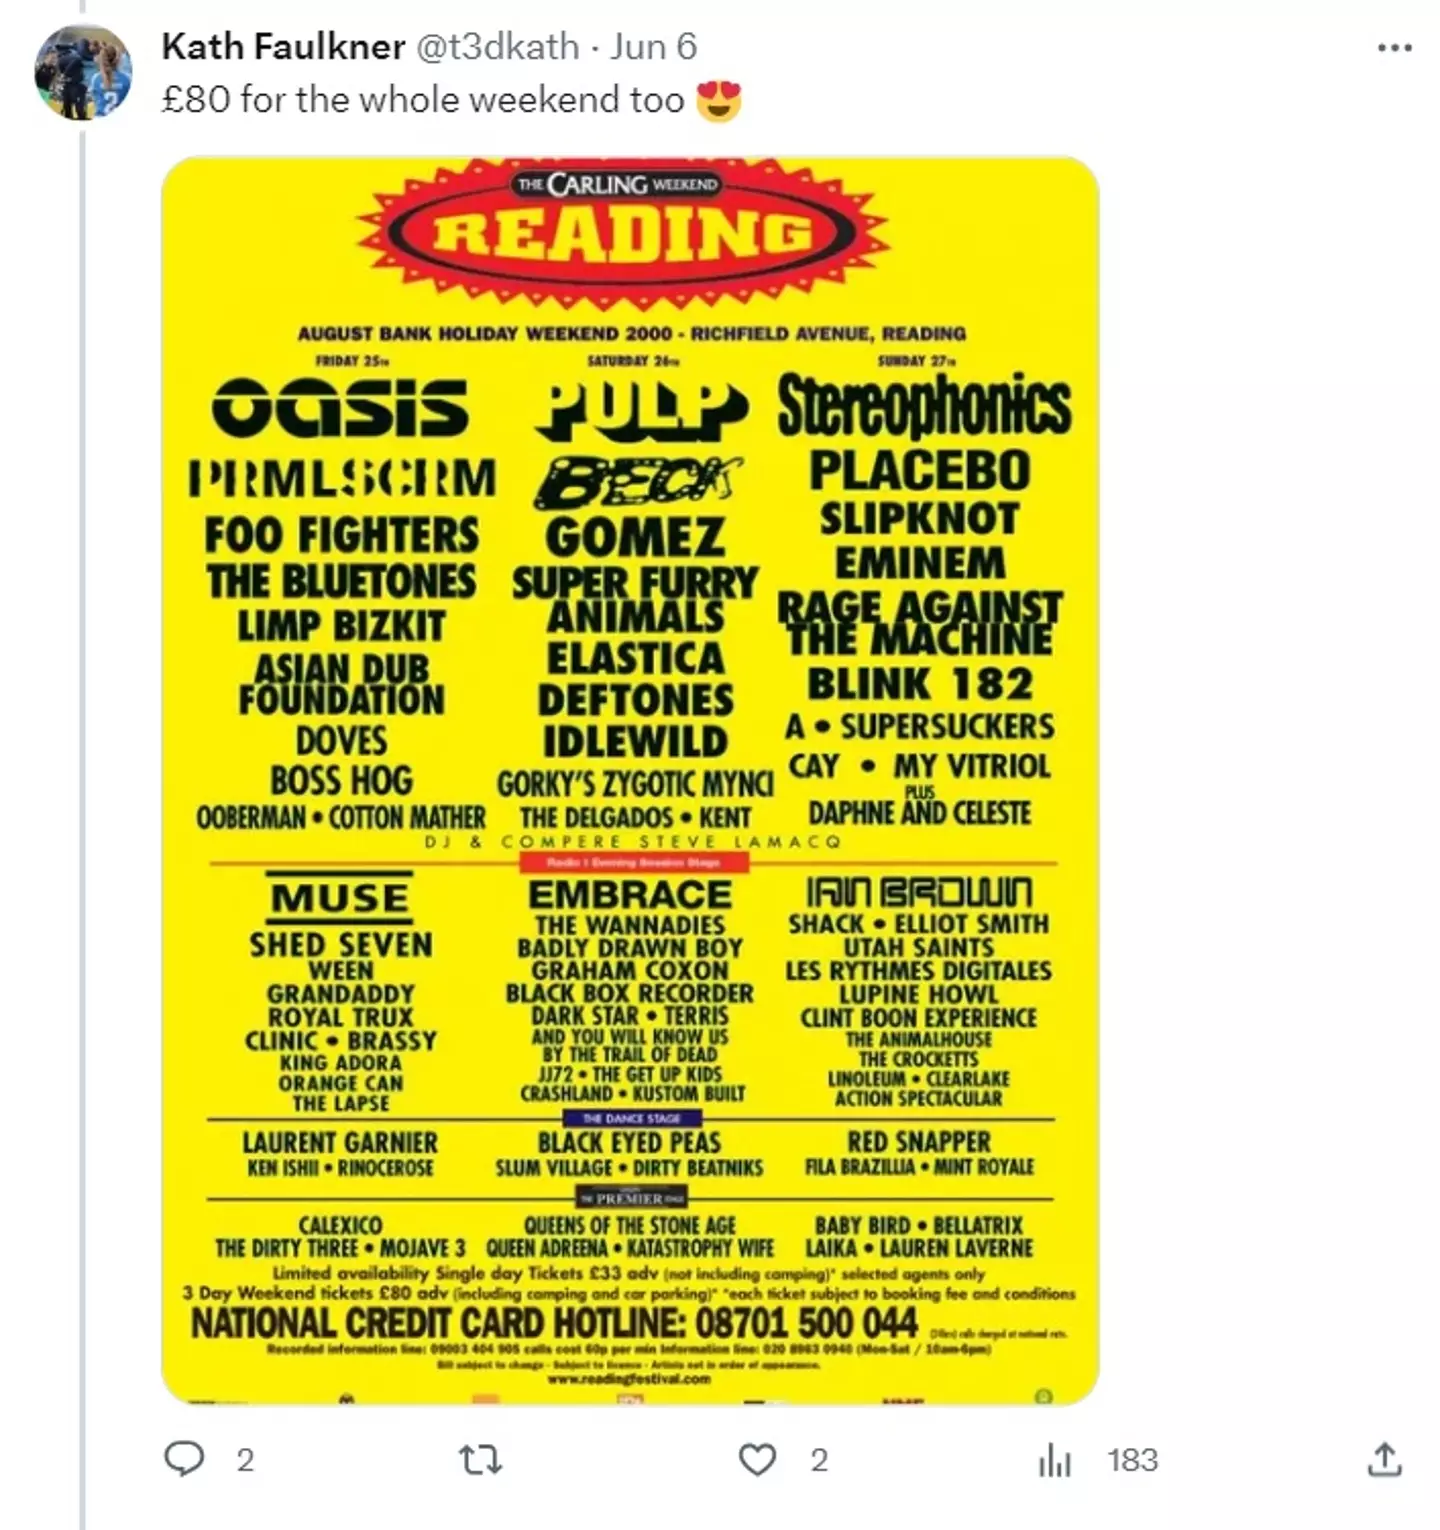 That legendary line-up cost you £80, Ticketmaster says that these days it'd cost £286.20.